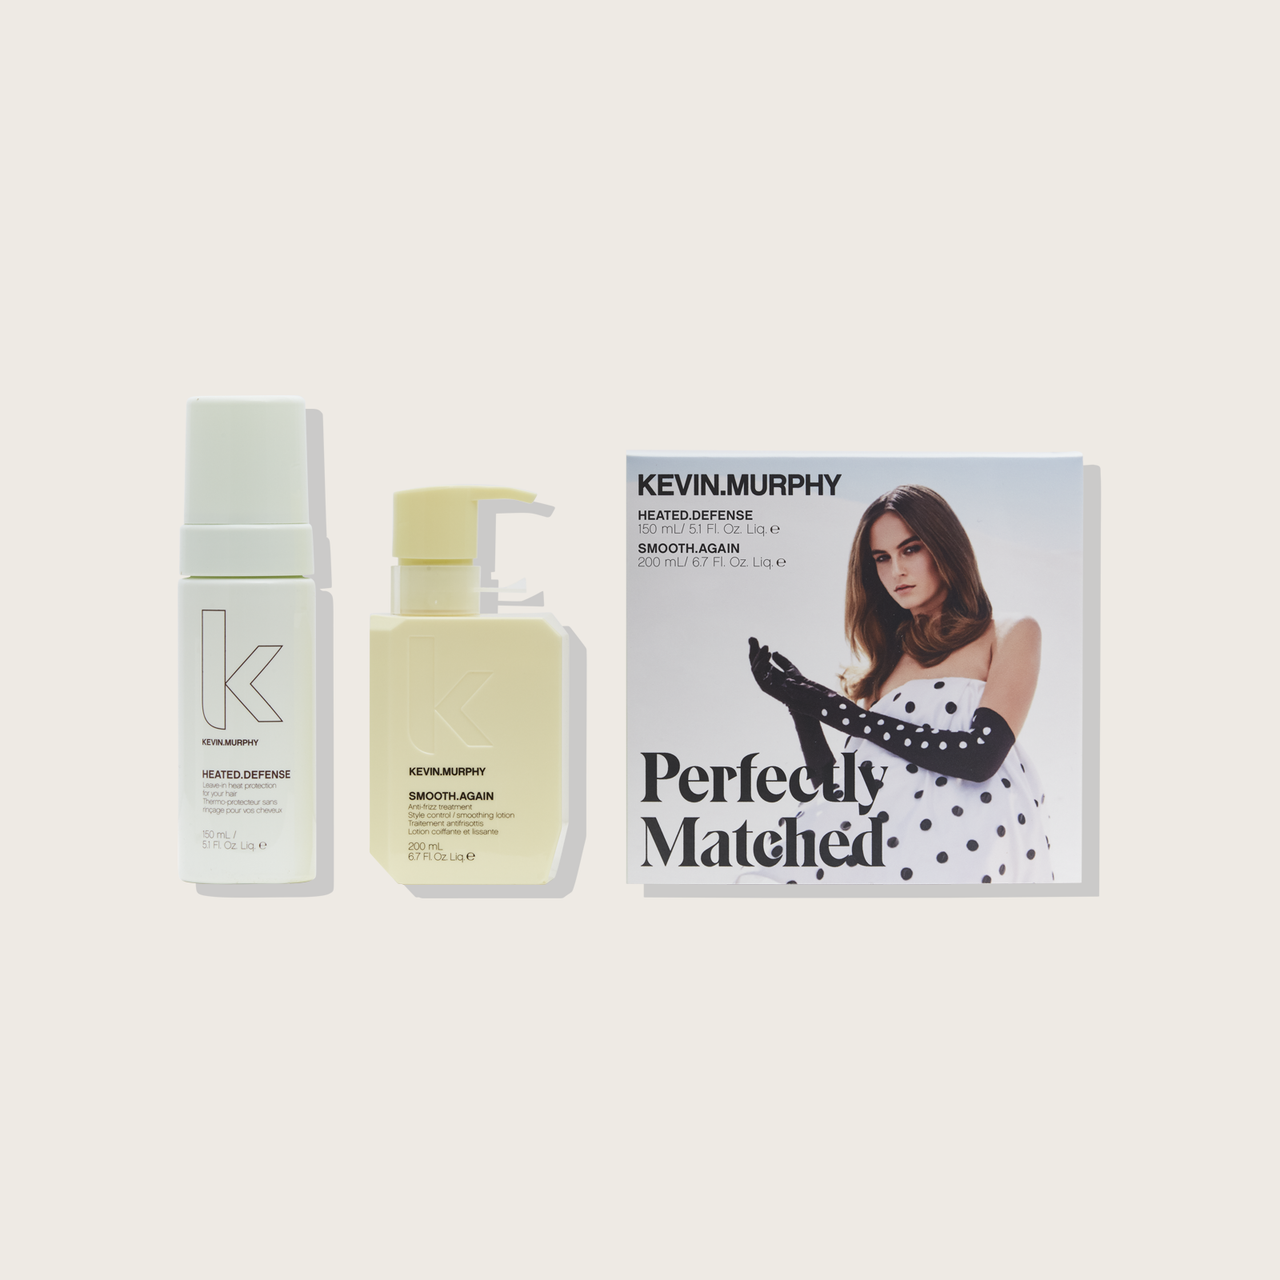 Kevin.murphy PERFECTLY MATCHED DUO 